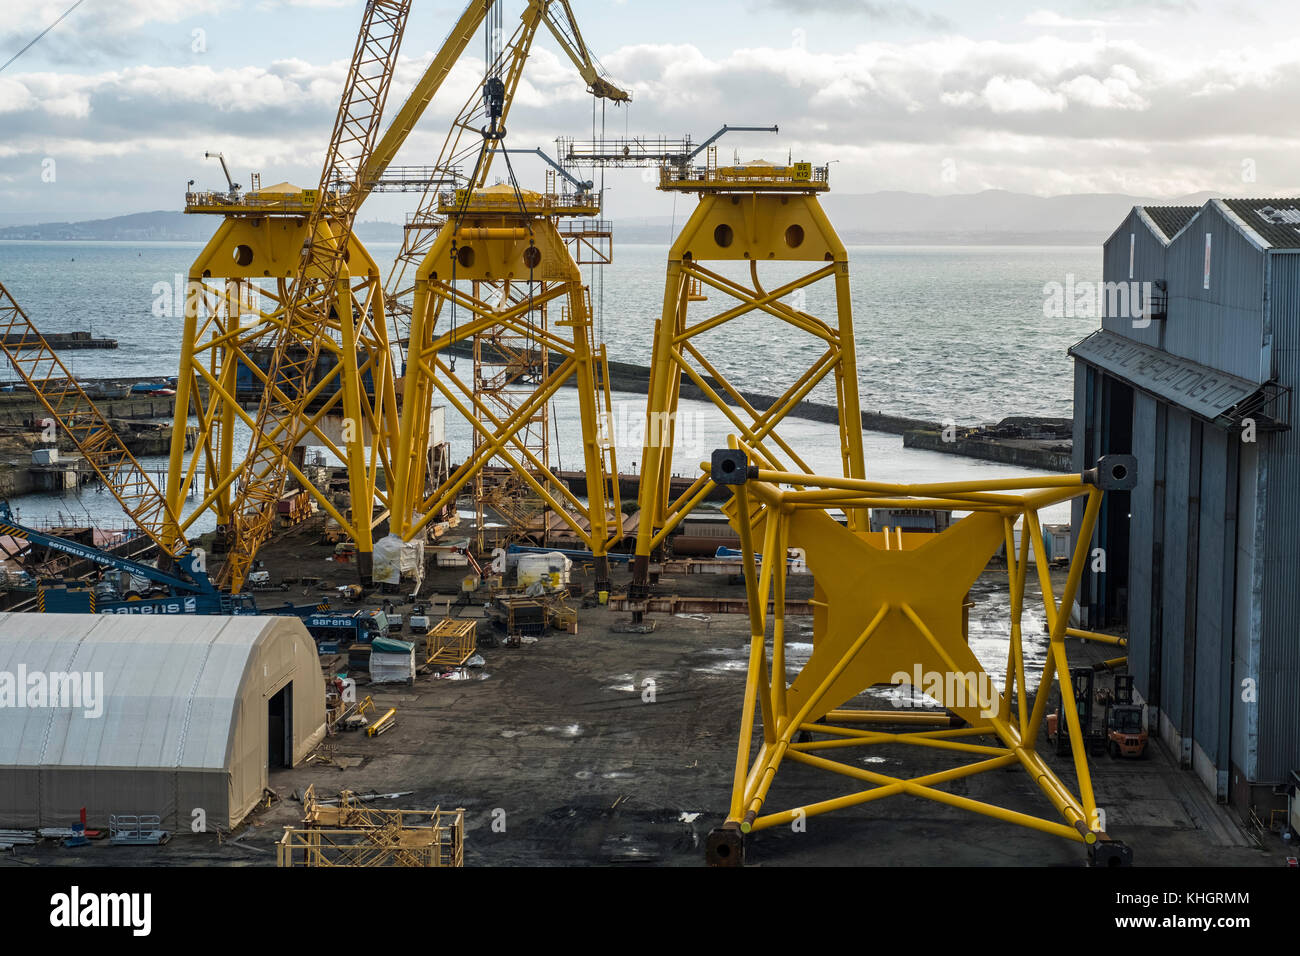 Burntisland, Scotland, United Kingdom. 17th Nov, 2017. View of offshore oil and gas platforms under construction at Burntisland Fabrications (BiFab) yard at Burntisland in Fife, Scotland. Workers at the company are at risk of losing their jobs because of contractual disputes. Scottish and UK Governments as well as the GMB and Unite unions are currently trying to reach a solution to save the workforce. Credit: Iain Masterton/Alamy Live News Stock Photo